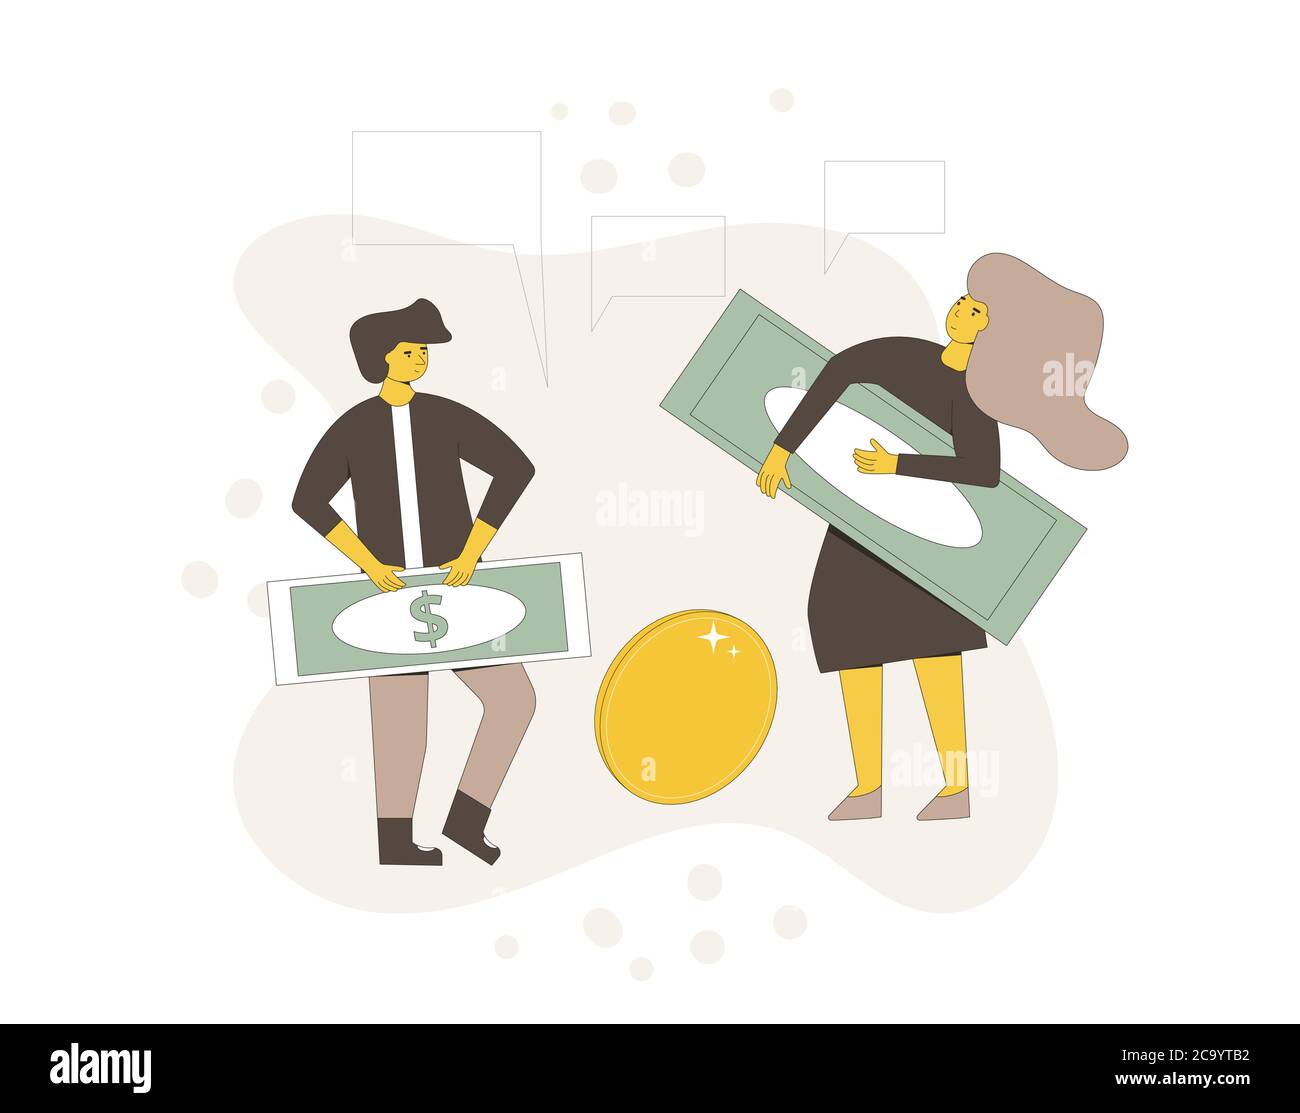 Life savings concept. Two characters with money. Line art flat vector illustration. Stock Vector